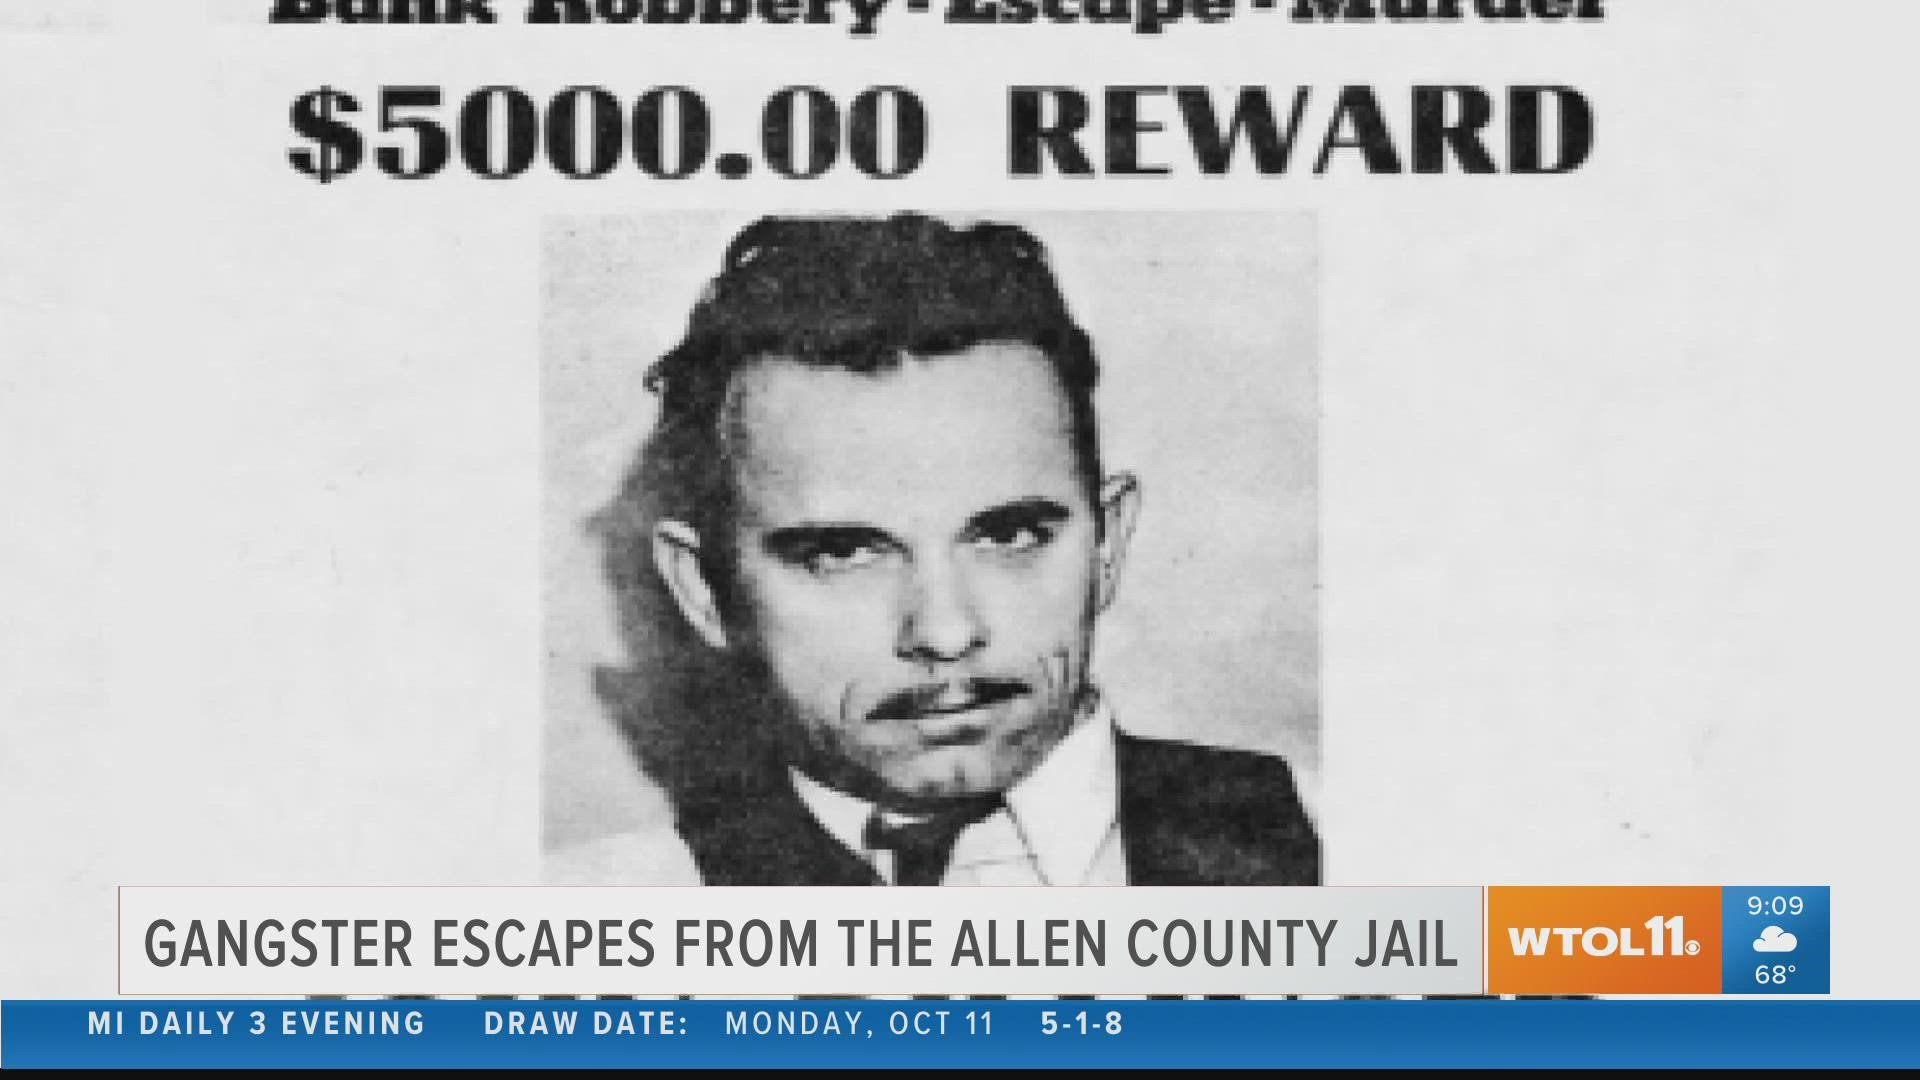 In 1933, gangster John Dillinger escapes from Allen County Jail in Lima. Sheriff Sarber is shot dead by Dillinger gang members during the daring jail break.